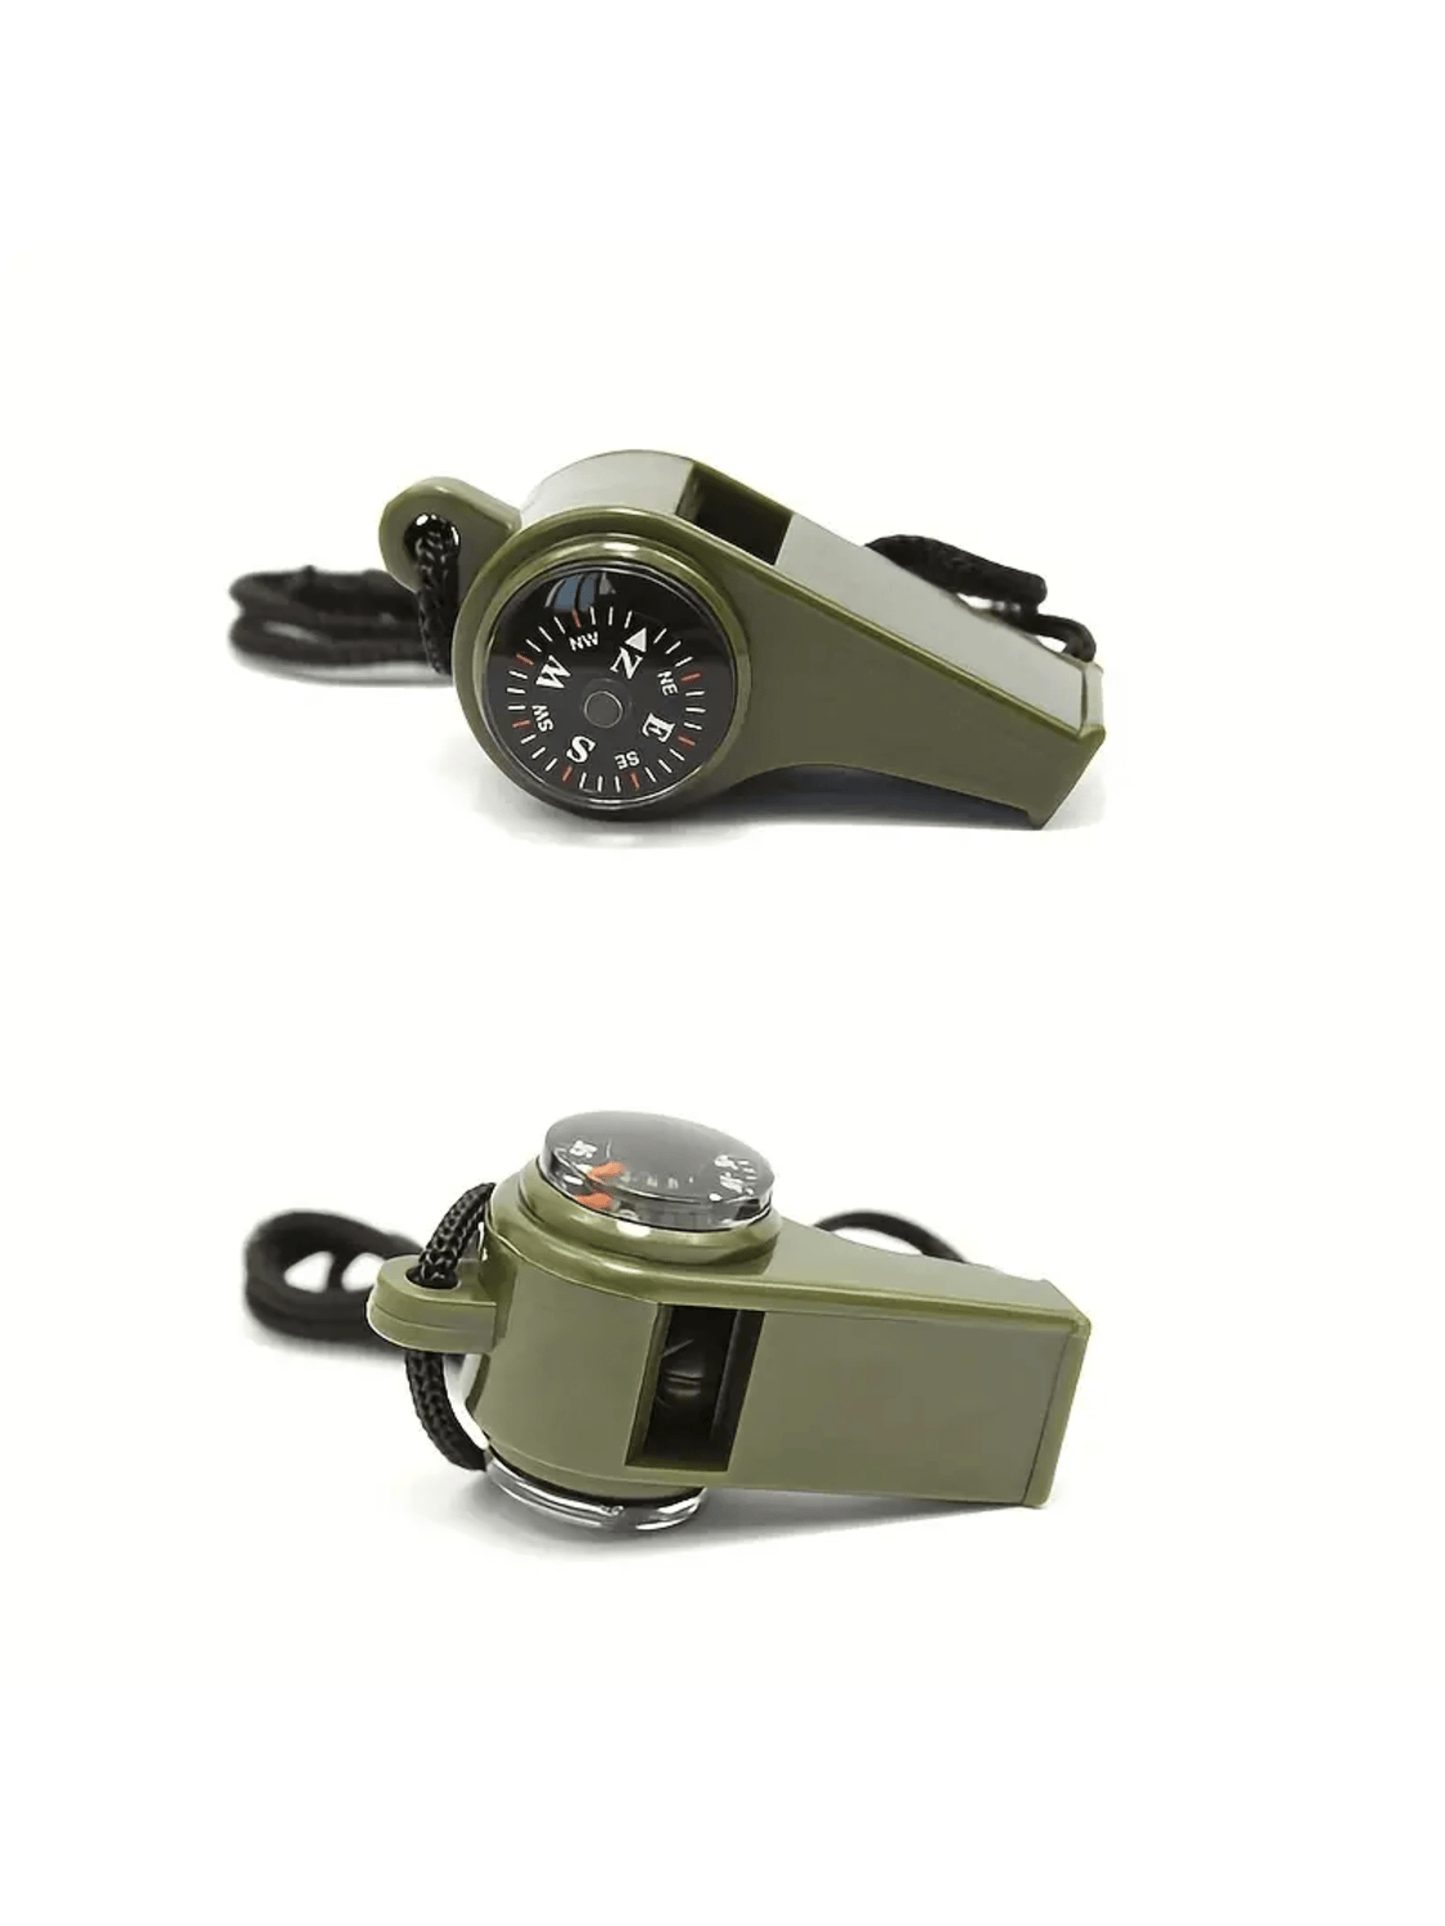 One 3-in-1 Emergency Survival Whistle with Compass & Thermometer 💜